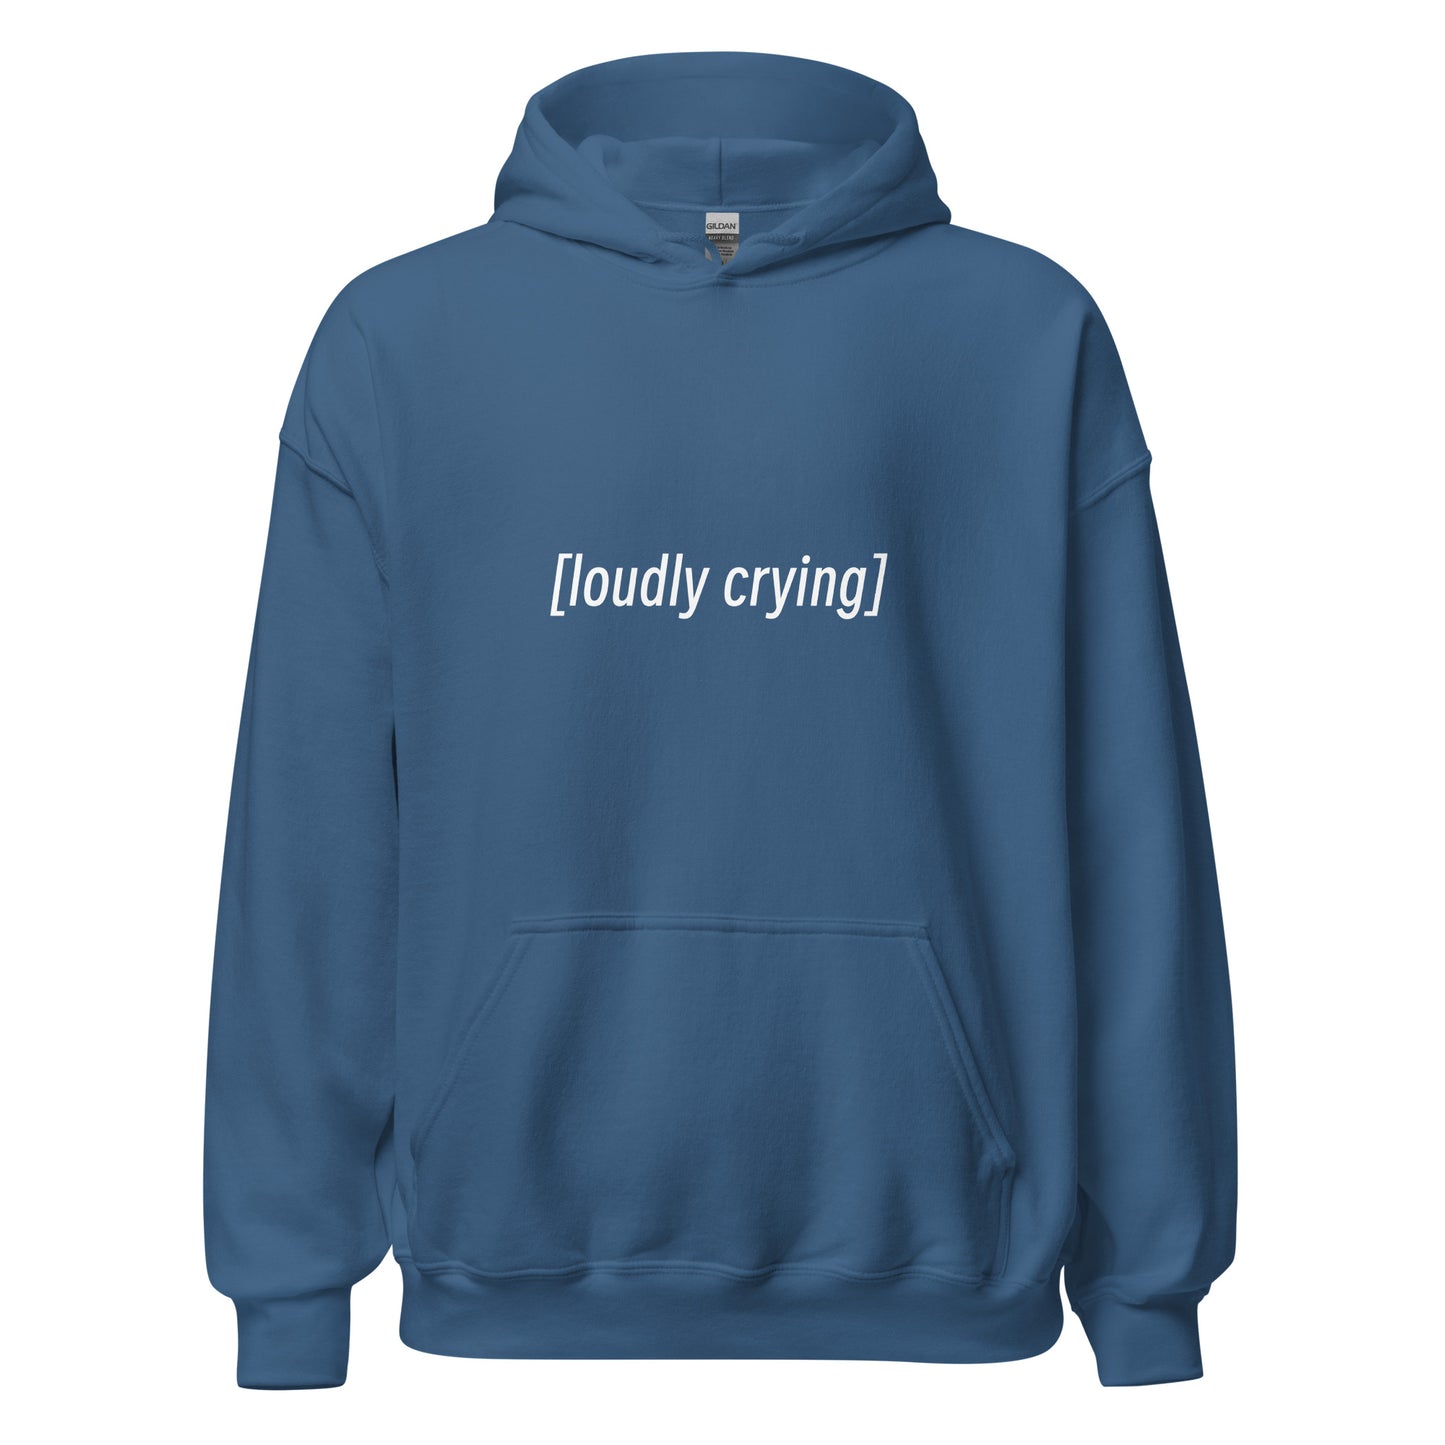 LOUDLY CRYING SUBTITLES Hoodie Pullover